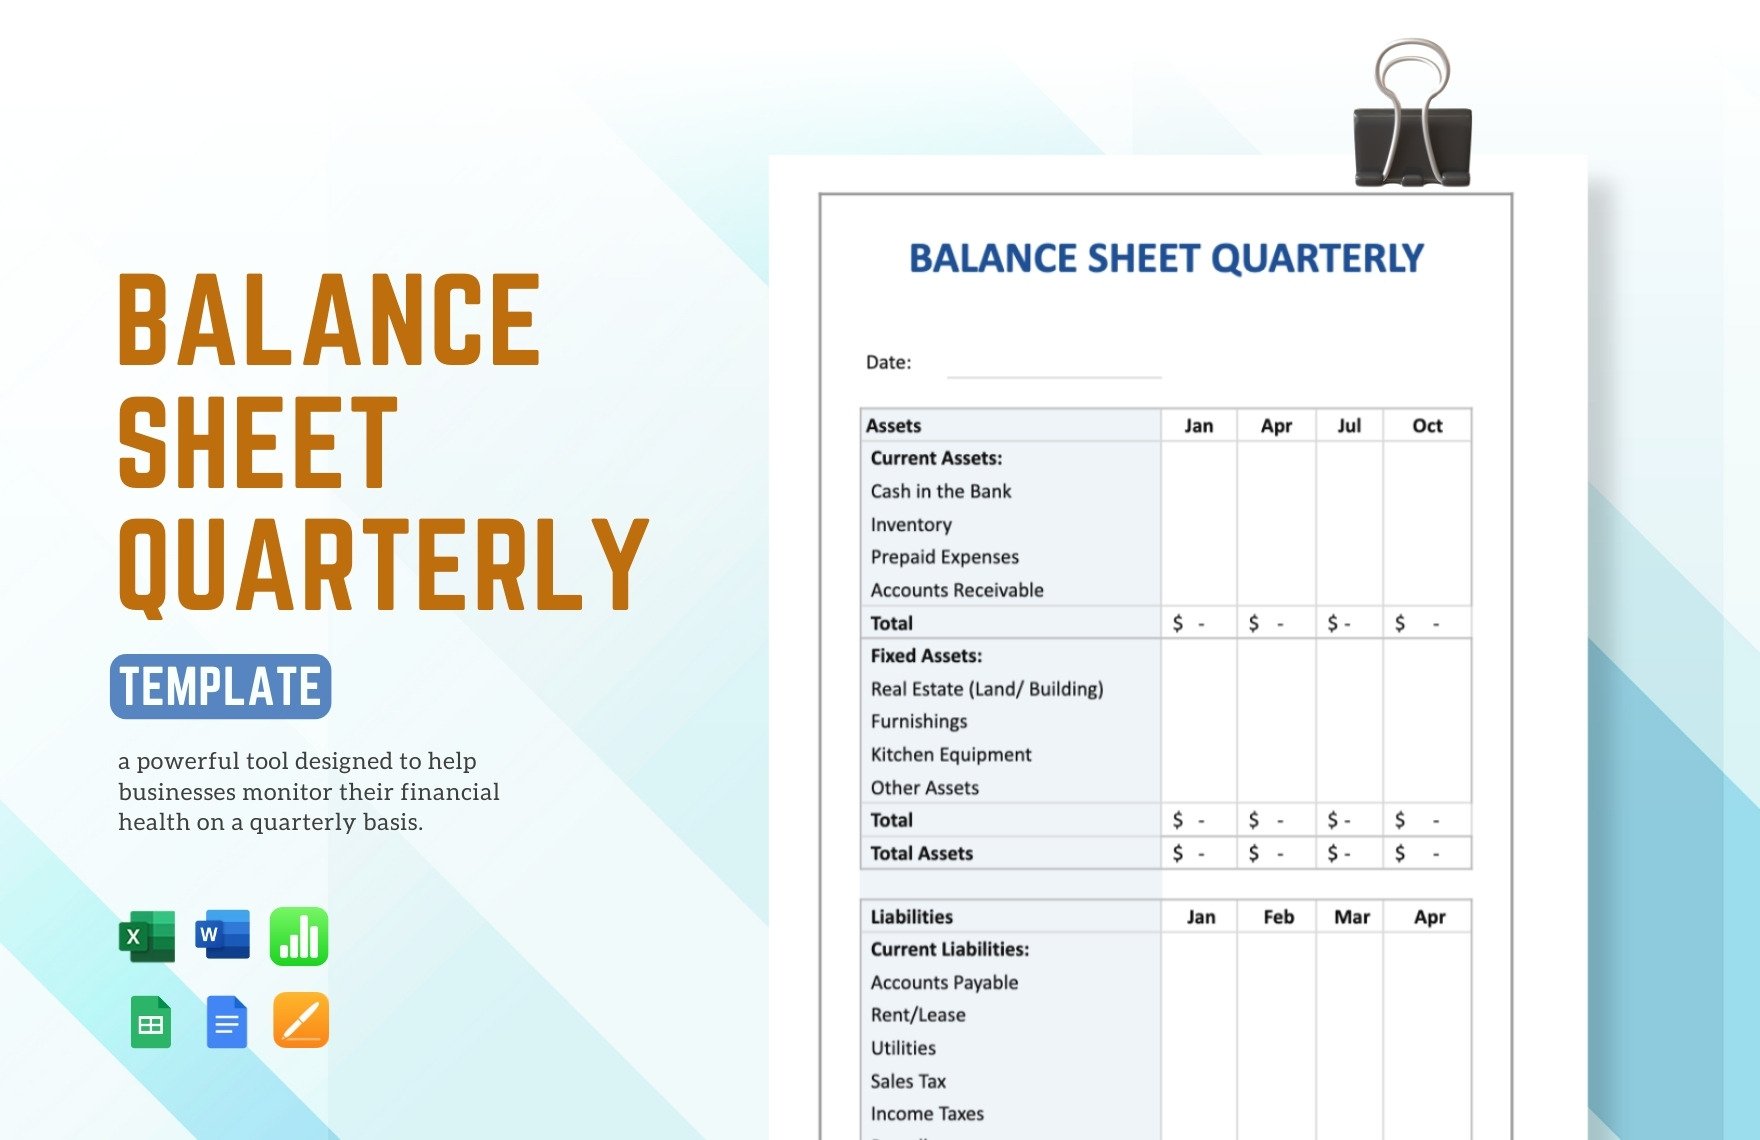 Balance Sheet Quarterly Template in Word, Google Docs, Excel, Google Sheets, Apple Pages, Apple Numbers